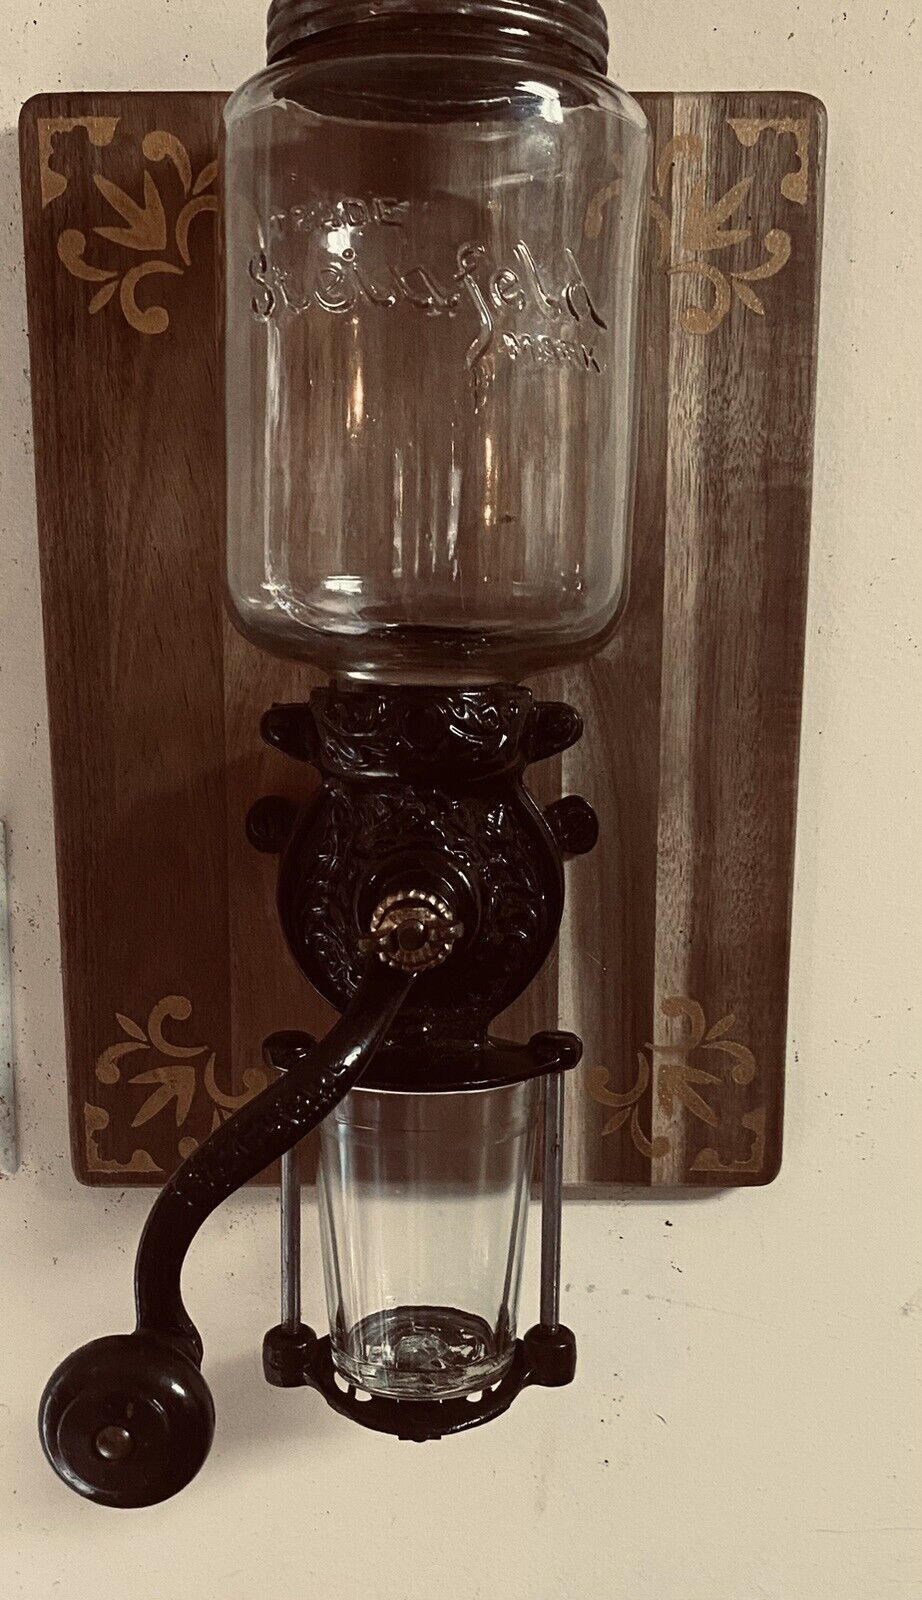 Trade Stanfield Mark Wall Mount Coffee Grinder